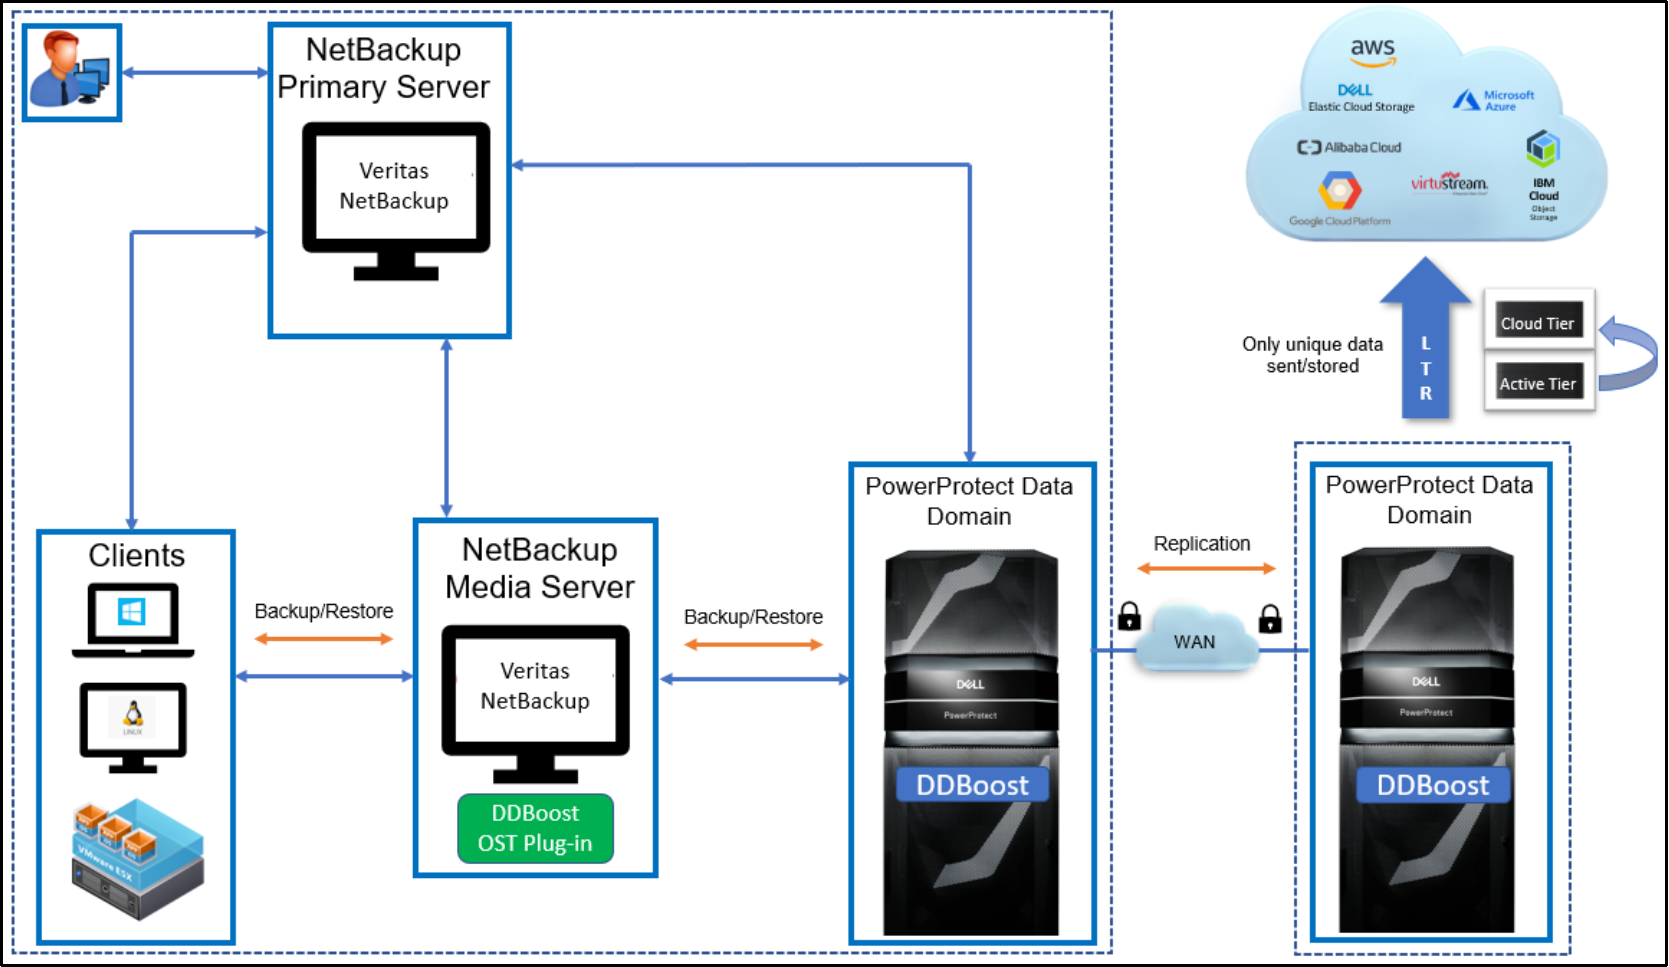 This image shows the reference architecture for DD Boost for Open Storage with NetBackup.